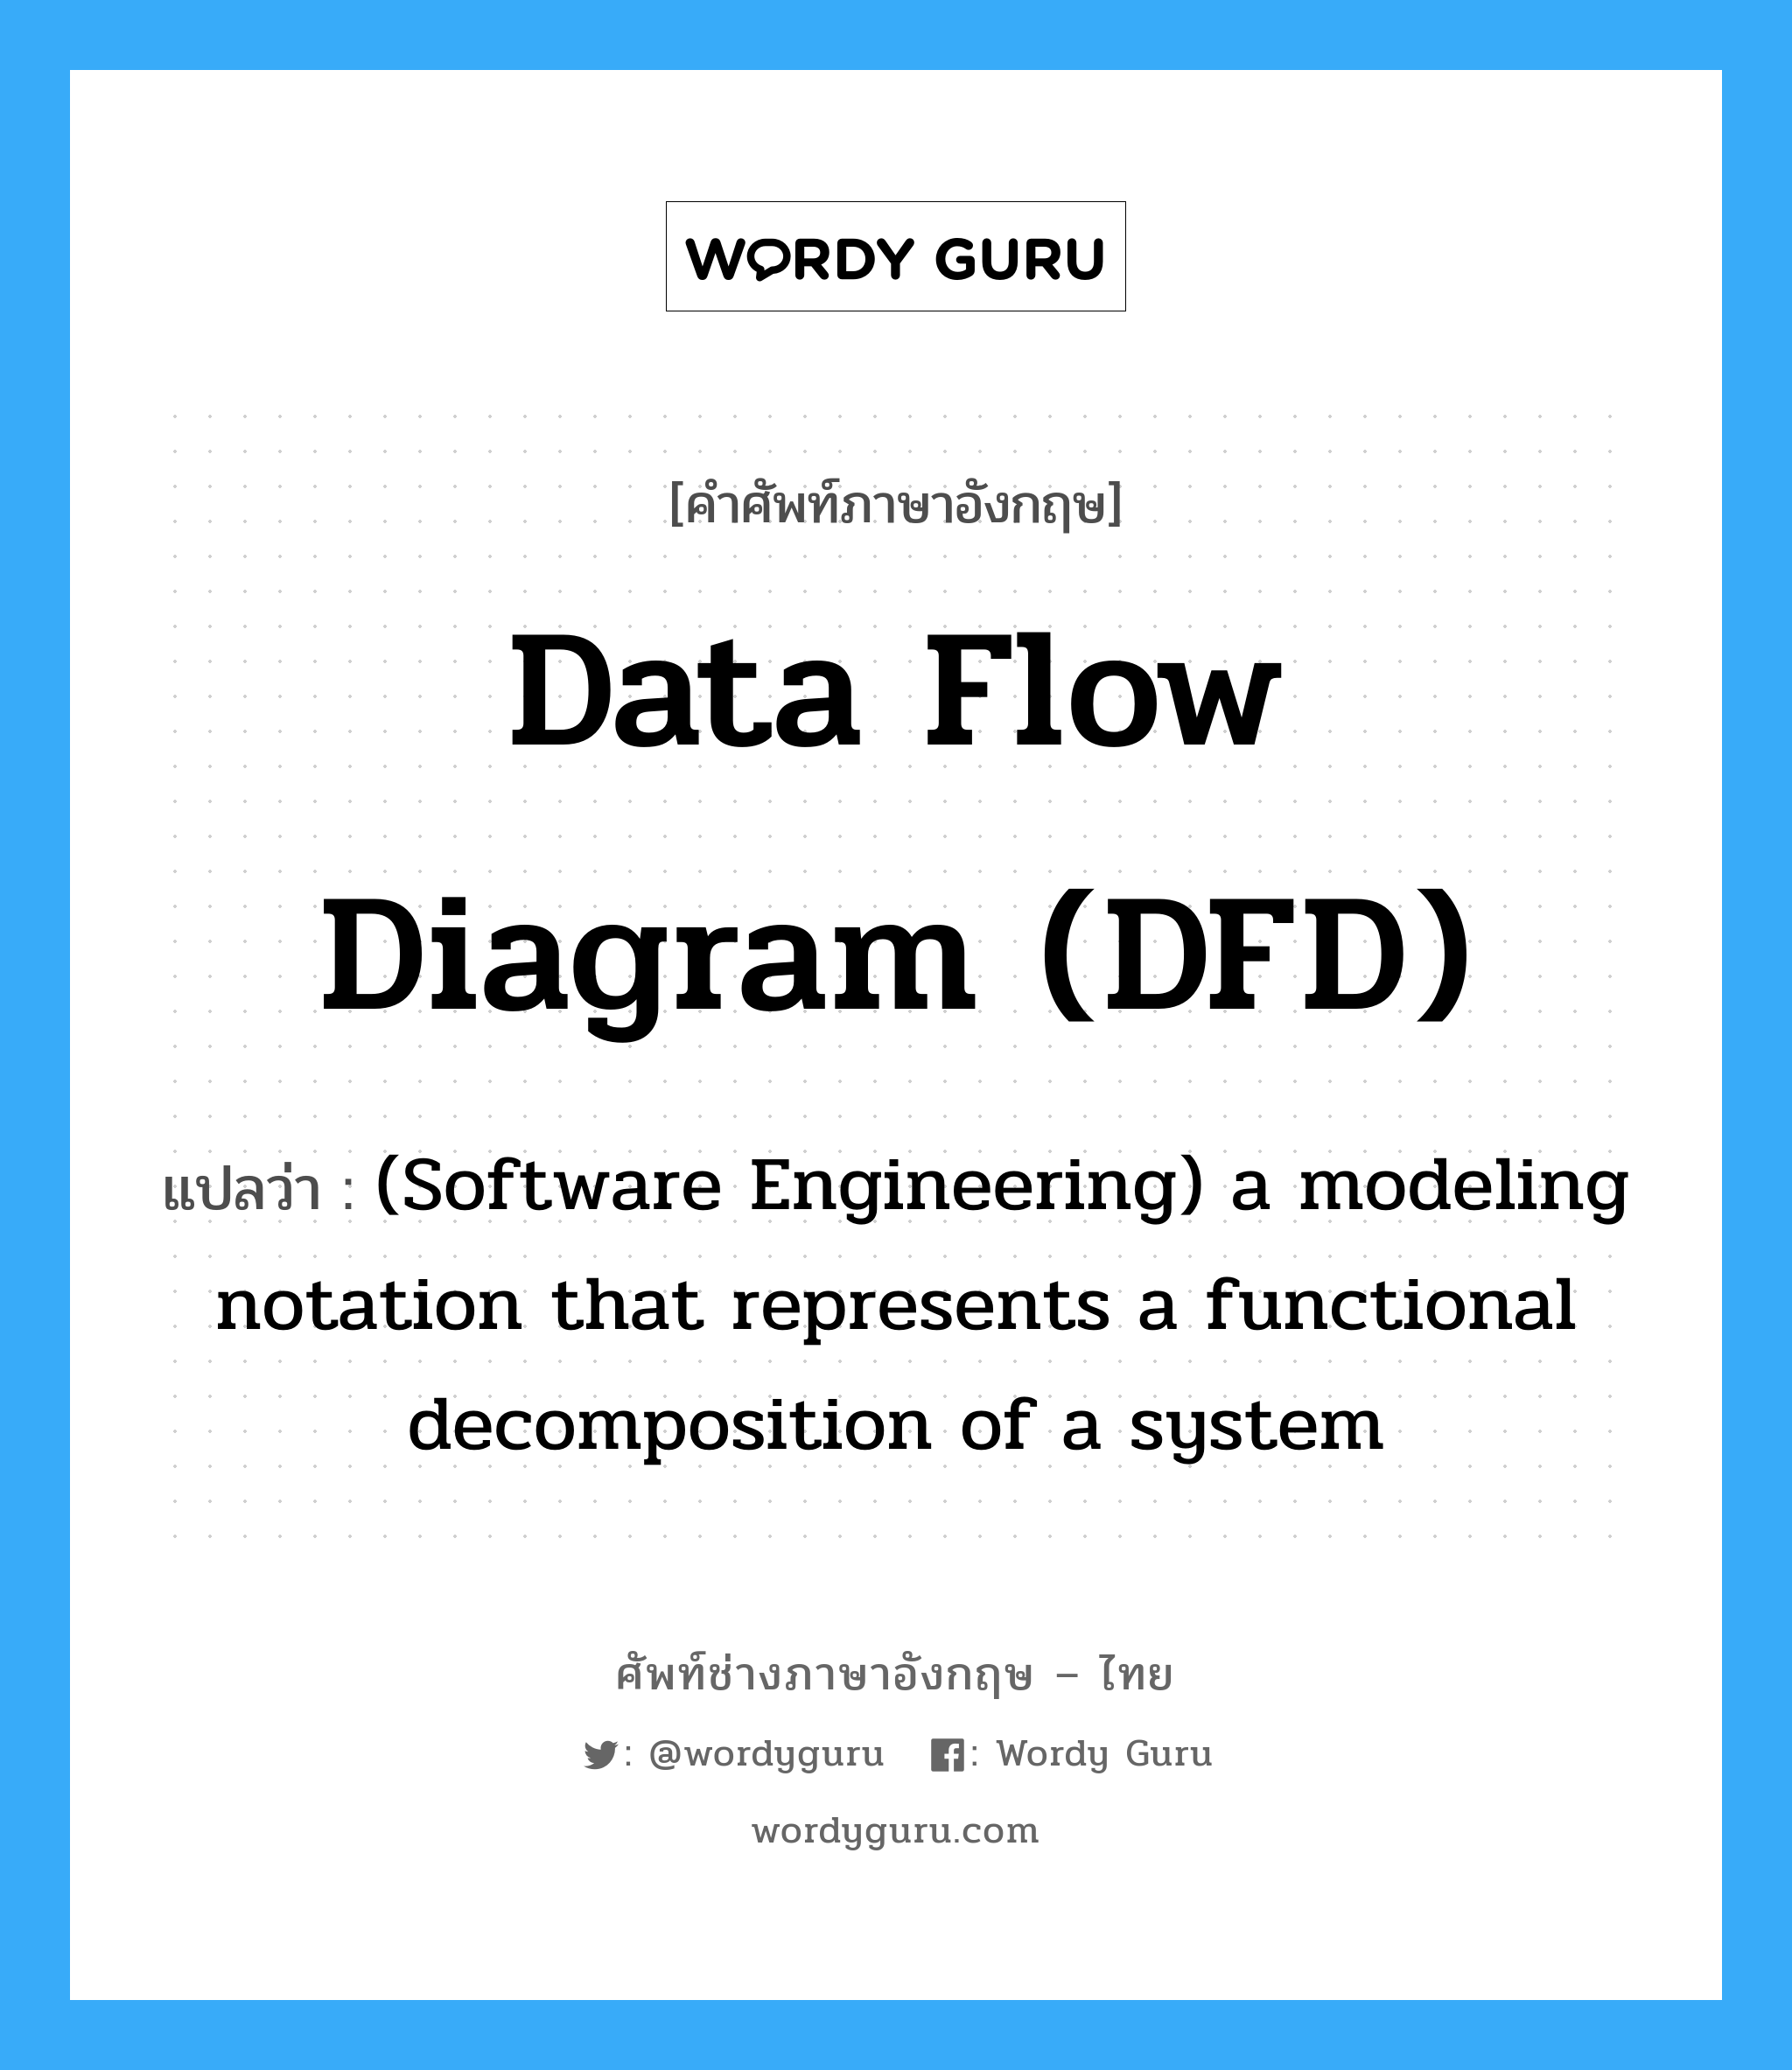 Data flow diagram (DFD) แปลว่า?, คำศัพท์ช่างภาษาอังกฤษ - ไทย Data flow diagram (DFD) คำศัพท์ภาษาอังกฤษ Data flow diagram (DFD) แปลว่า (Software Engineering) a modeling notation that represents a functional decomposition of a system